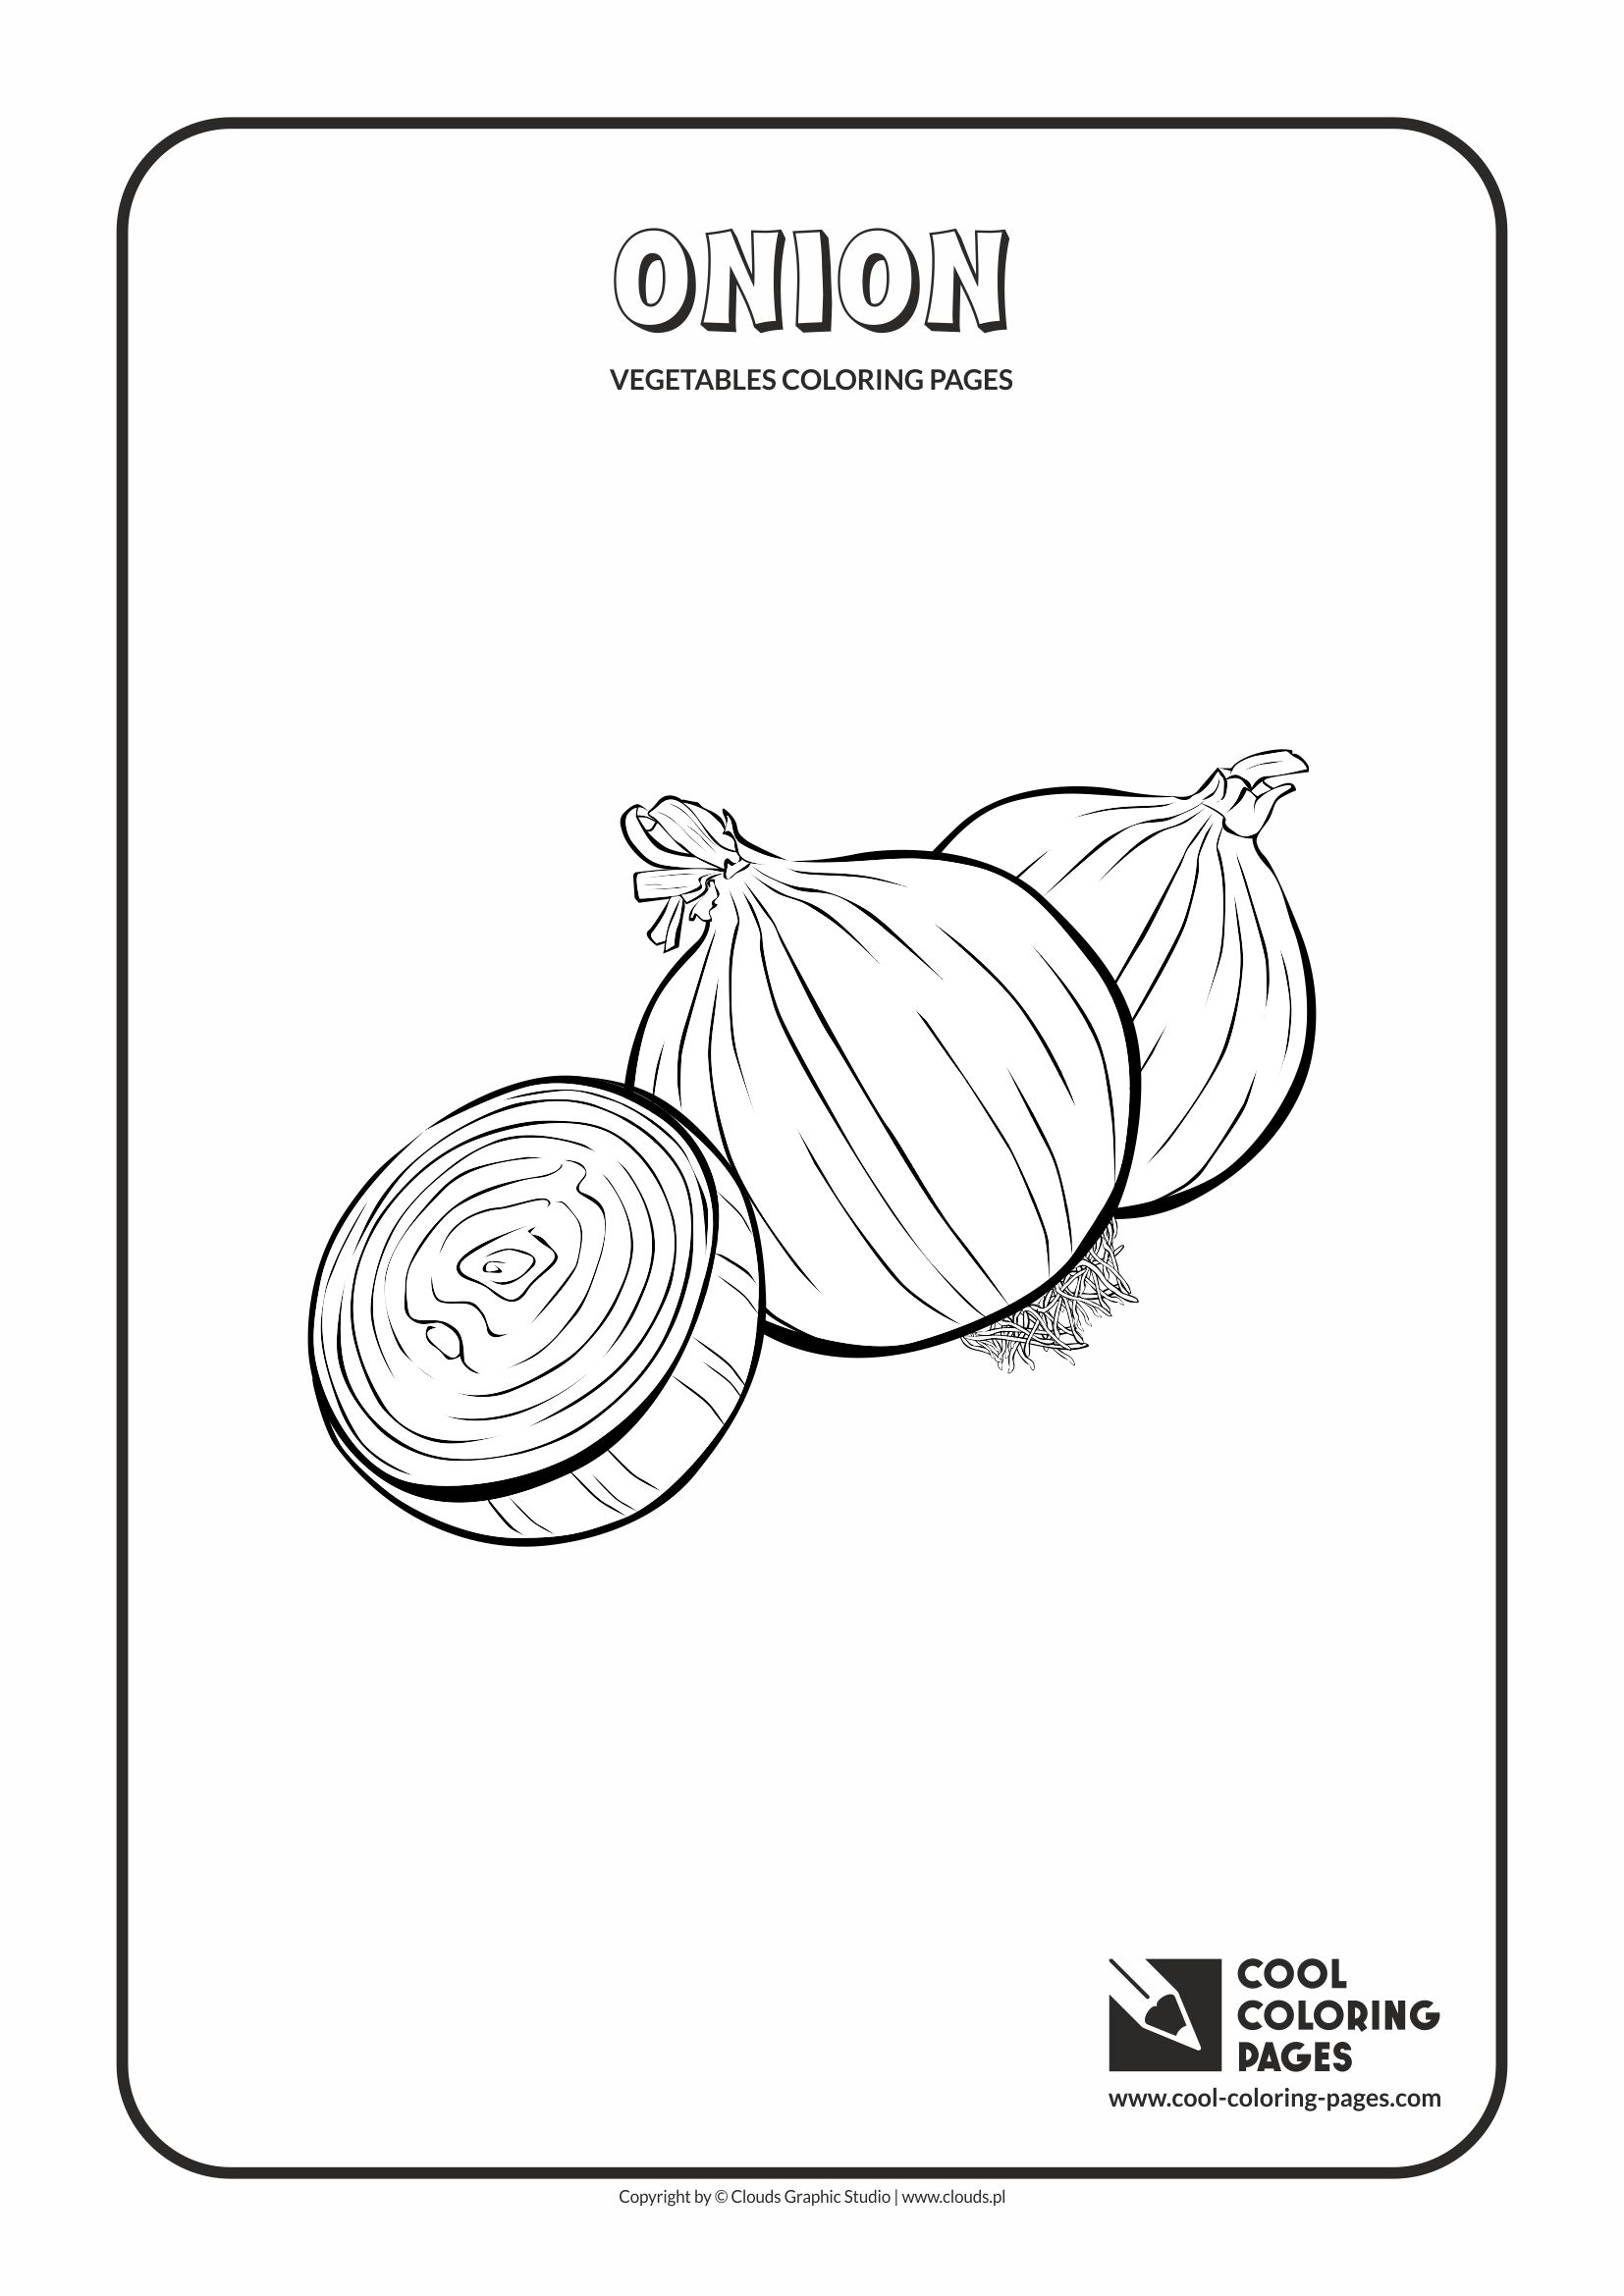 Cool Coloring Pages - Plants / Onion / Coloring page with onion